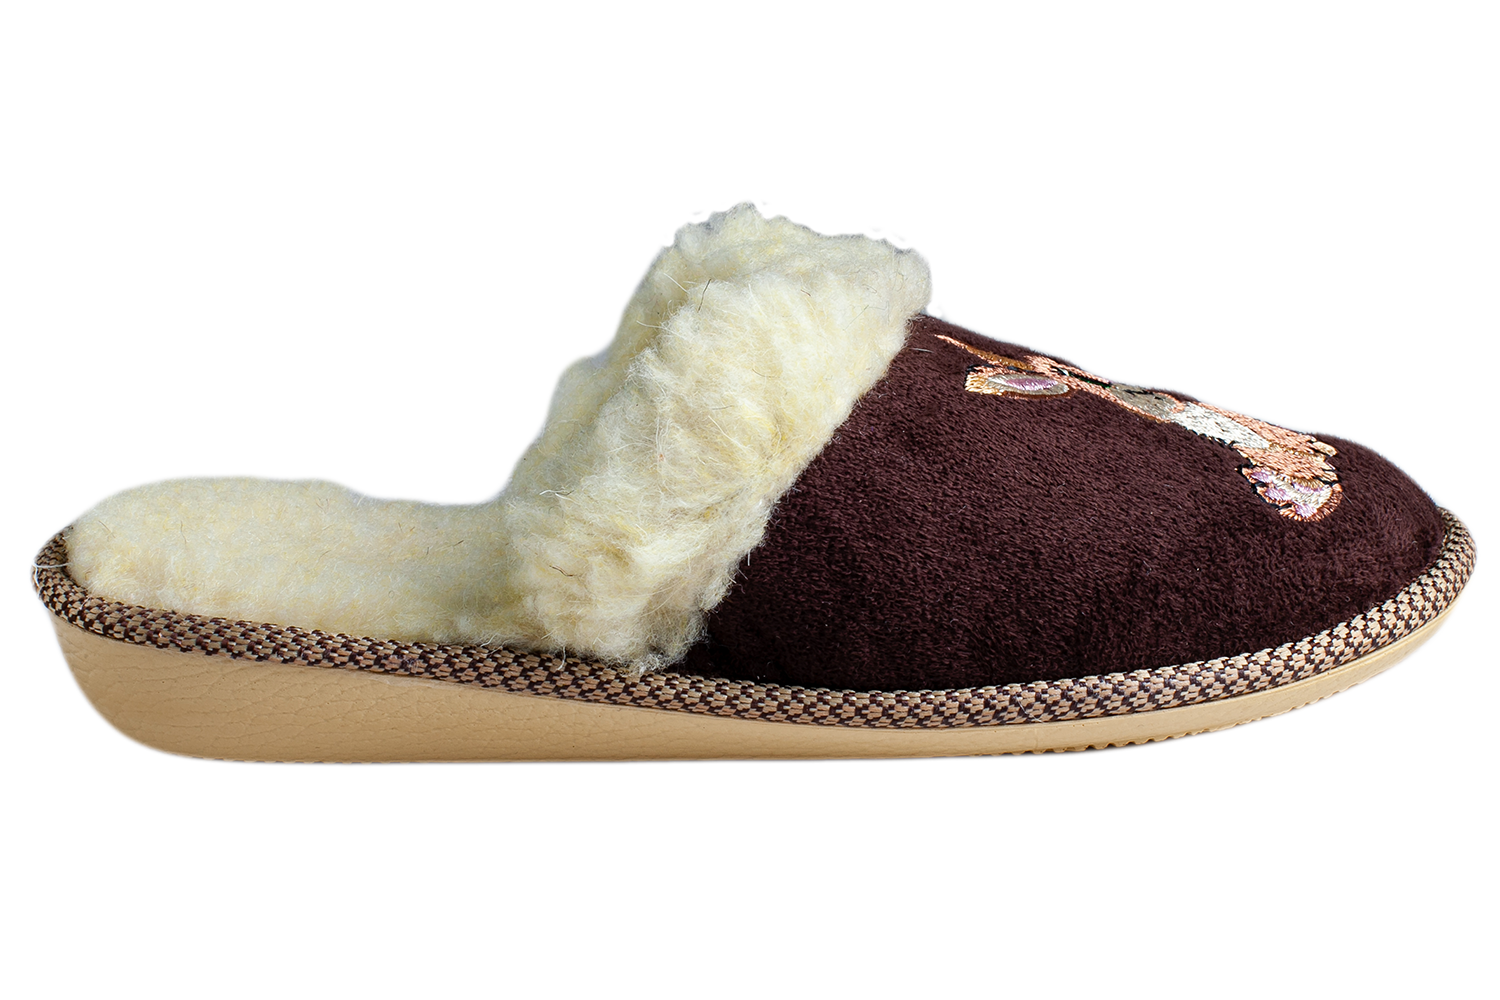 Children's slippers BELSTA suede with embroidery on sheepskin - 3